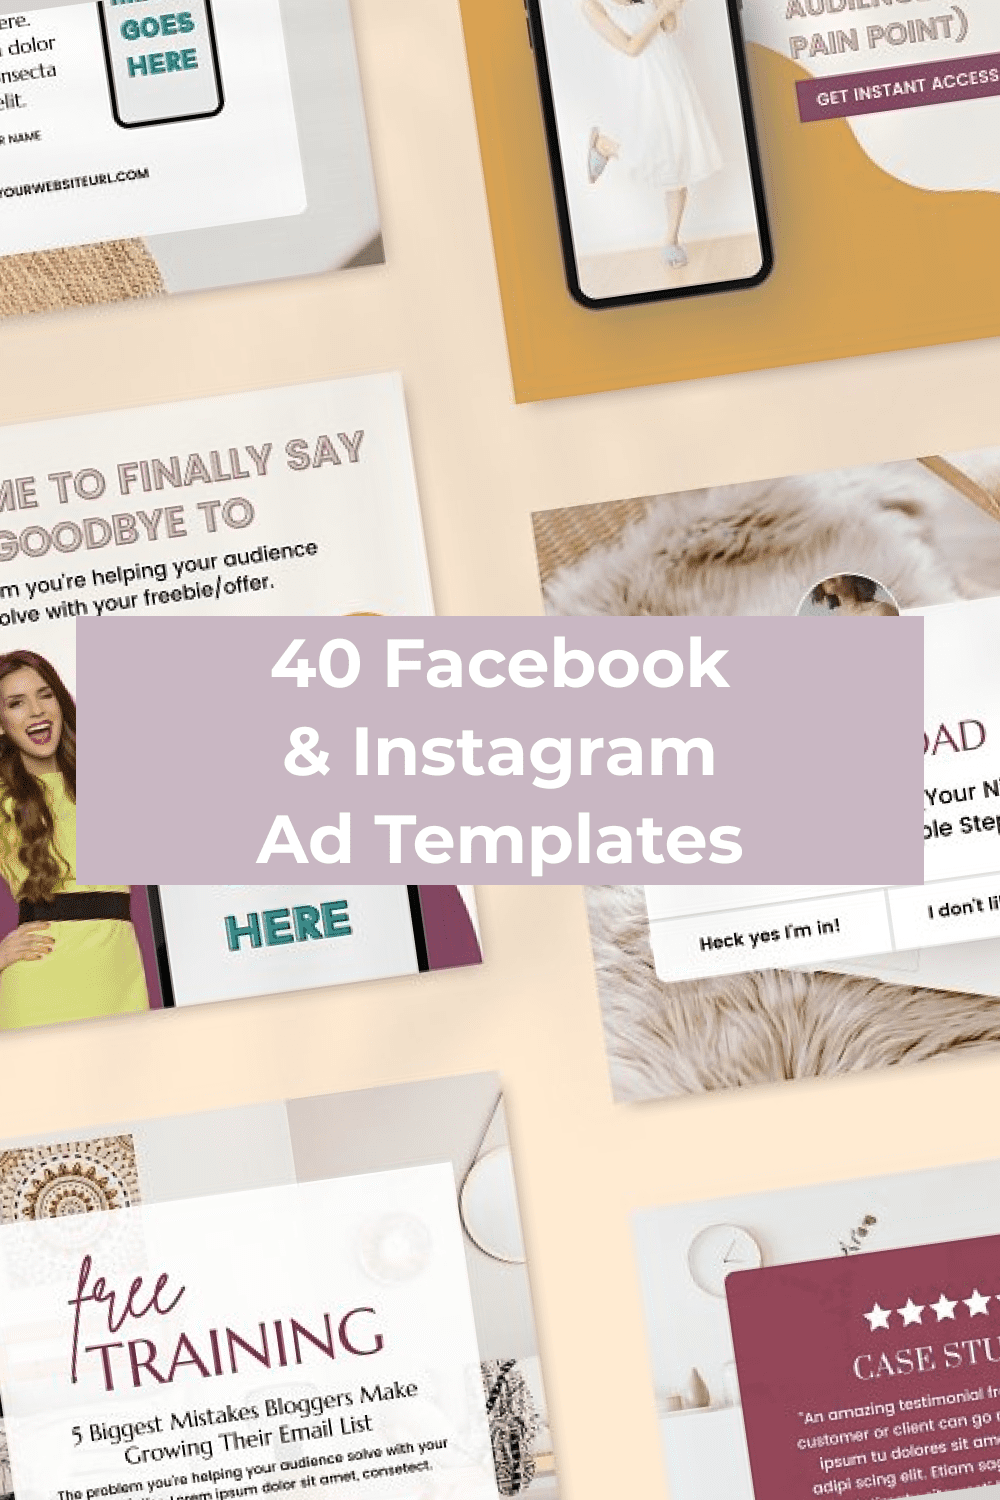 Use this template for your social media ads.